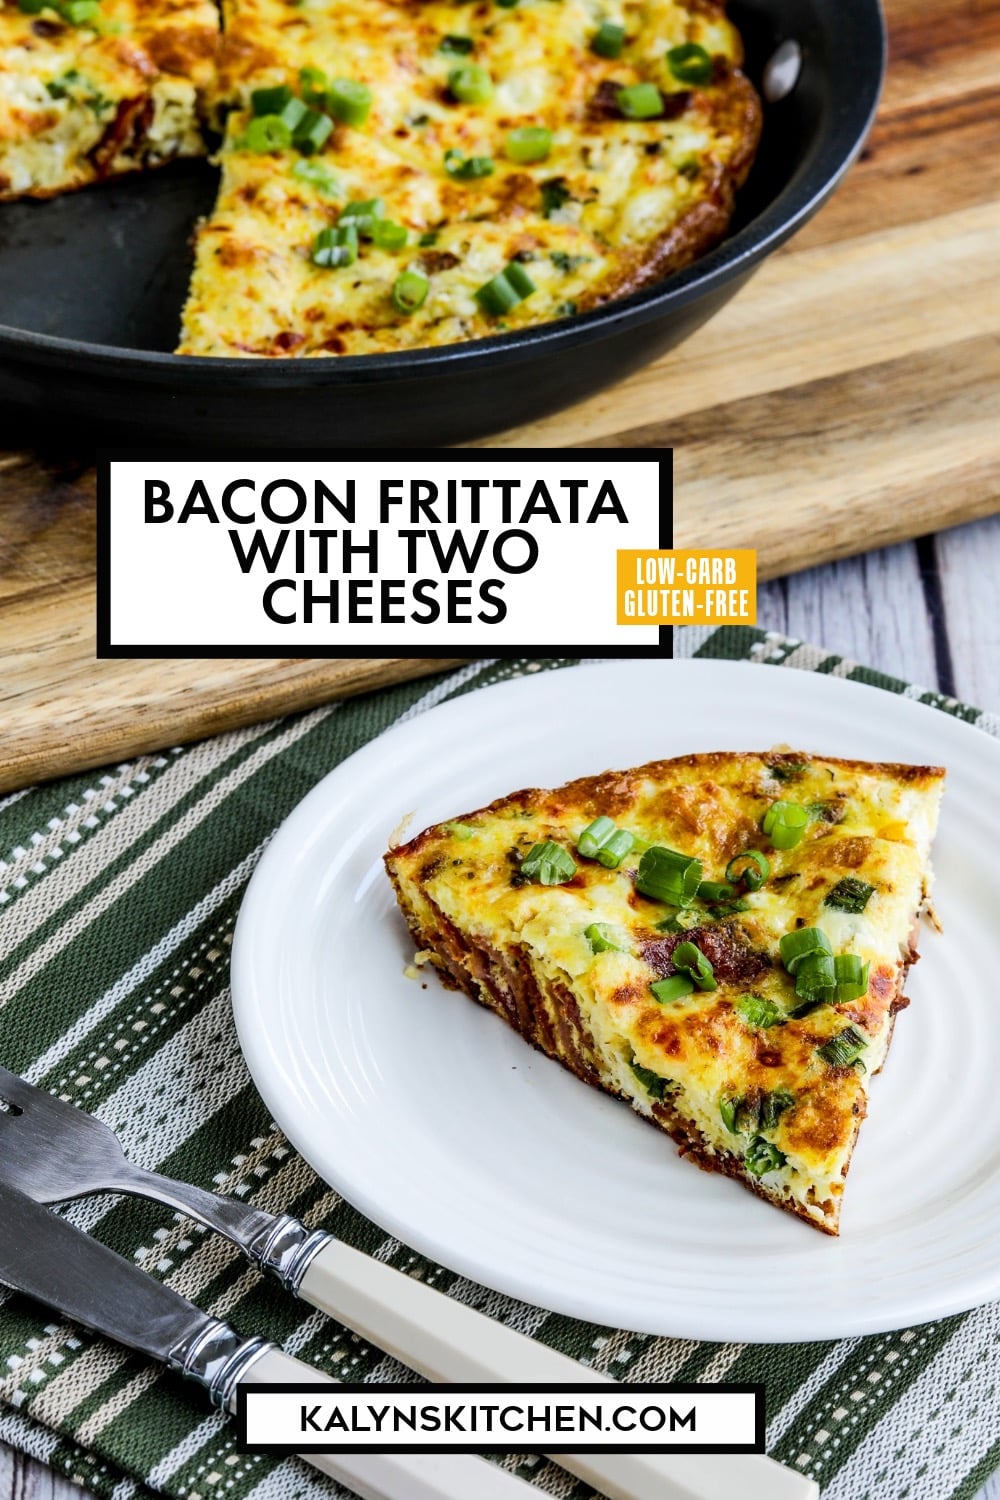 Pinterest image of Bacon Frittata with Two Cheeses